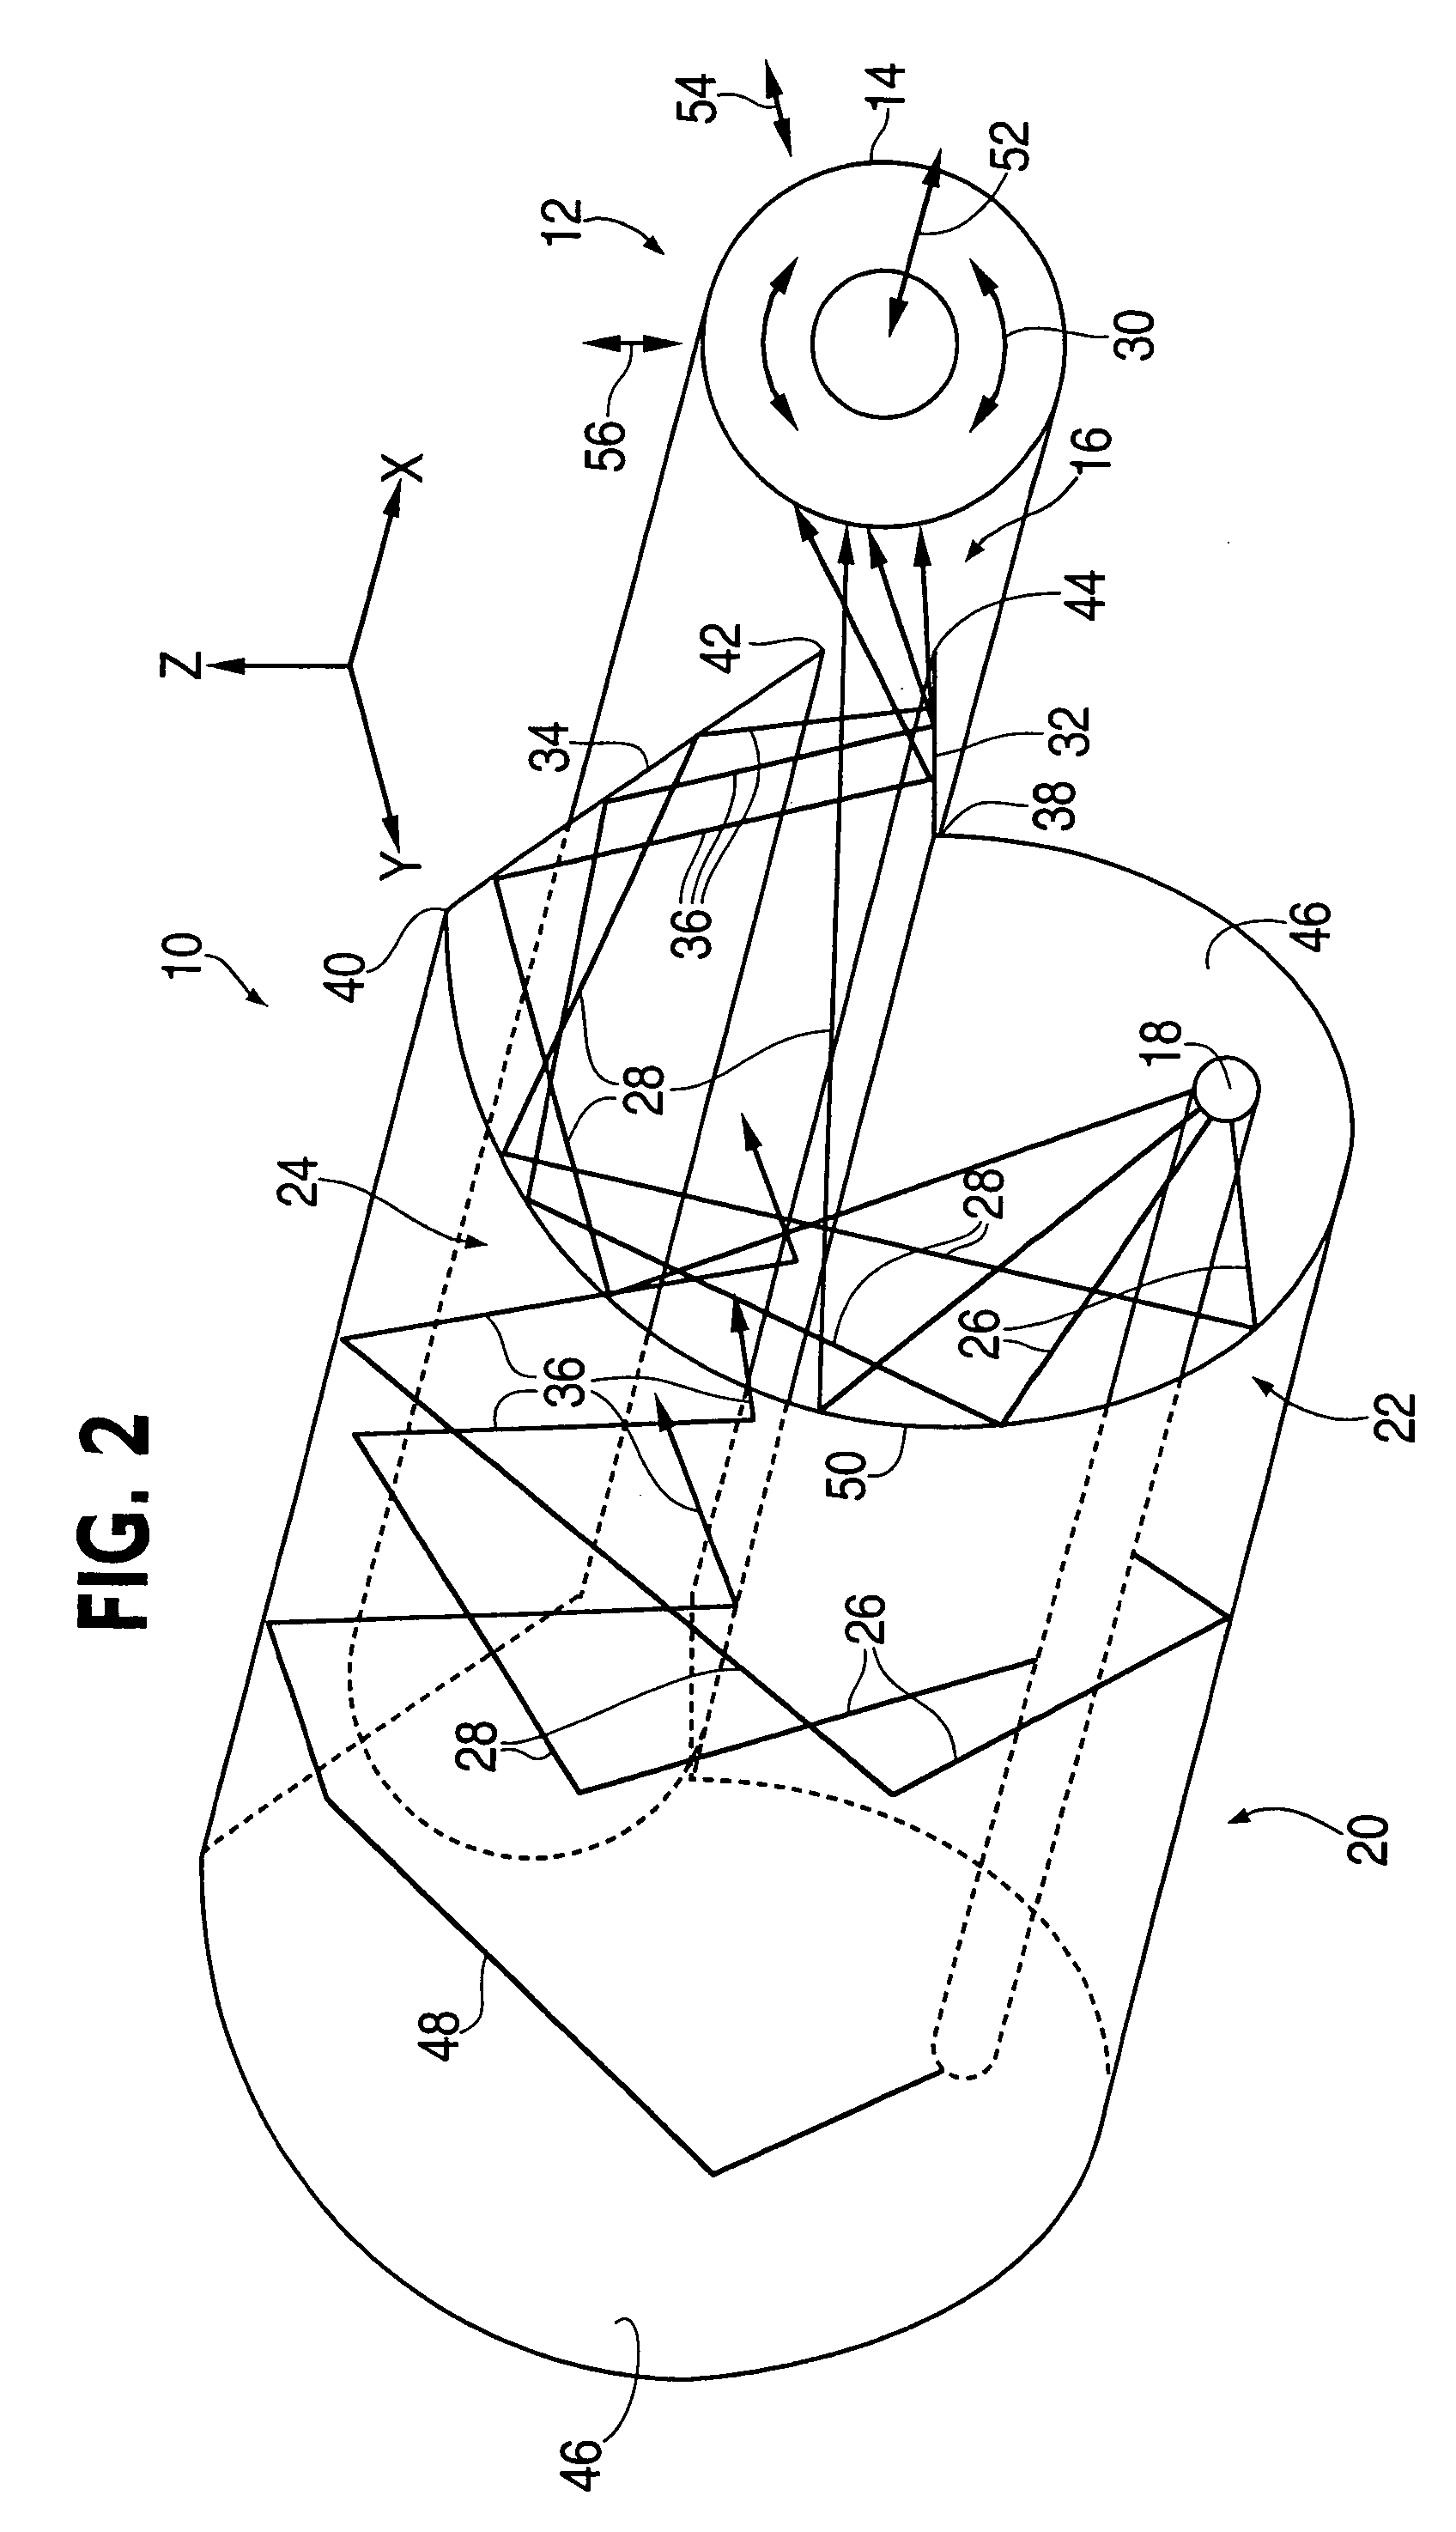 Apparatus and method for providing substantially uniform radiation of a three-dimensional object with at least one curved surface